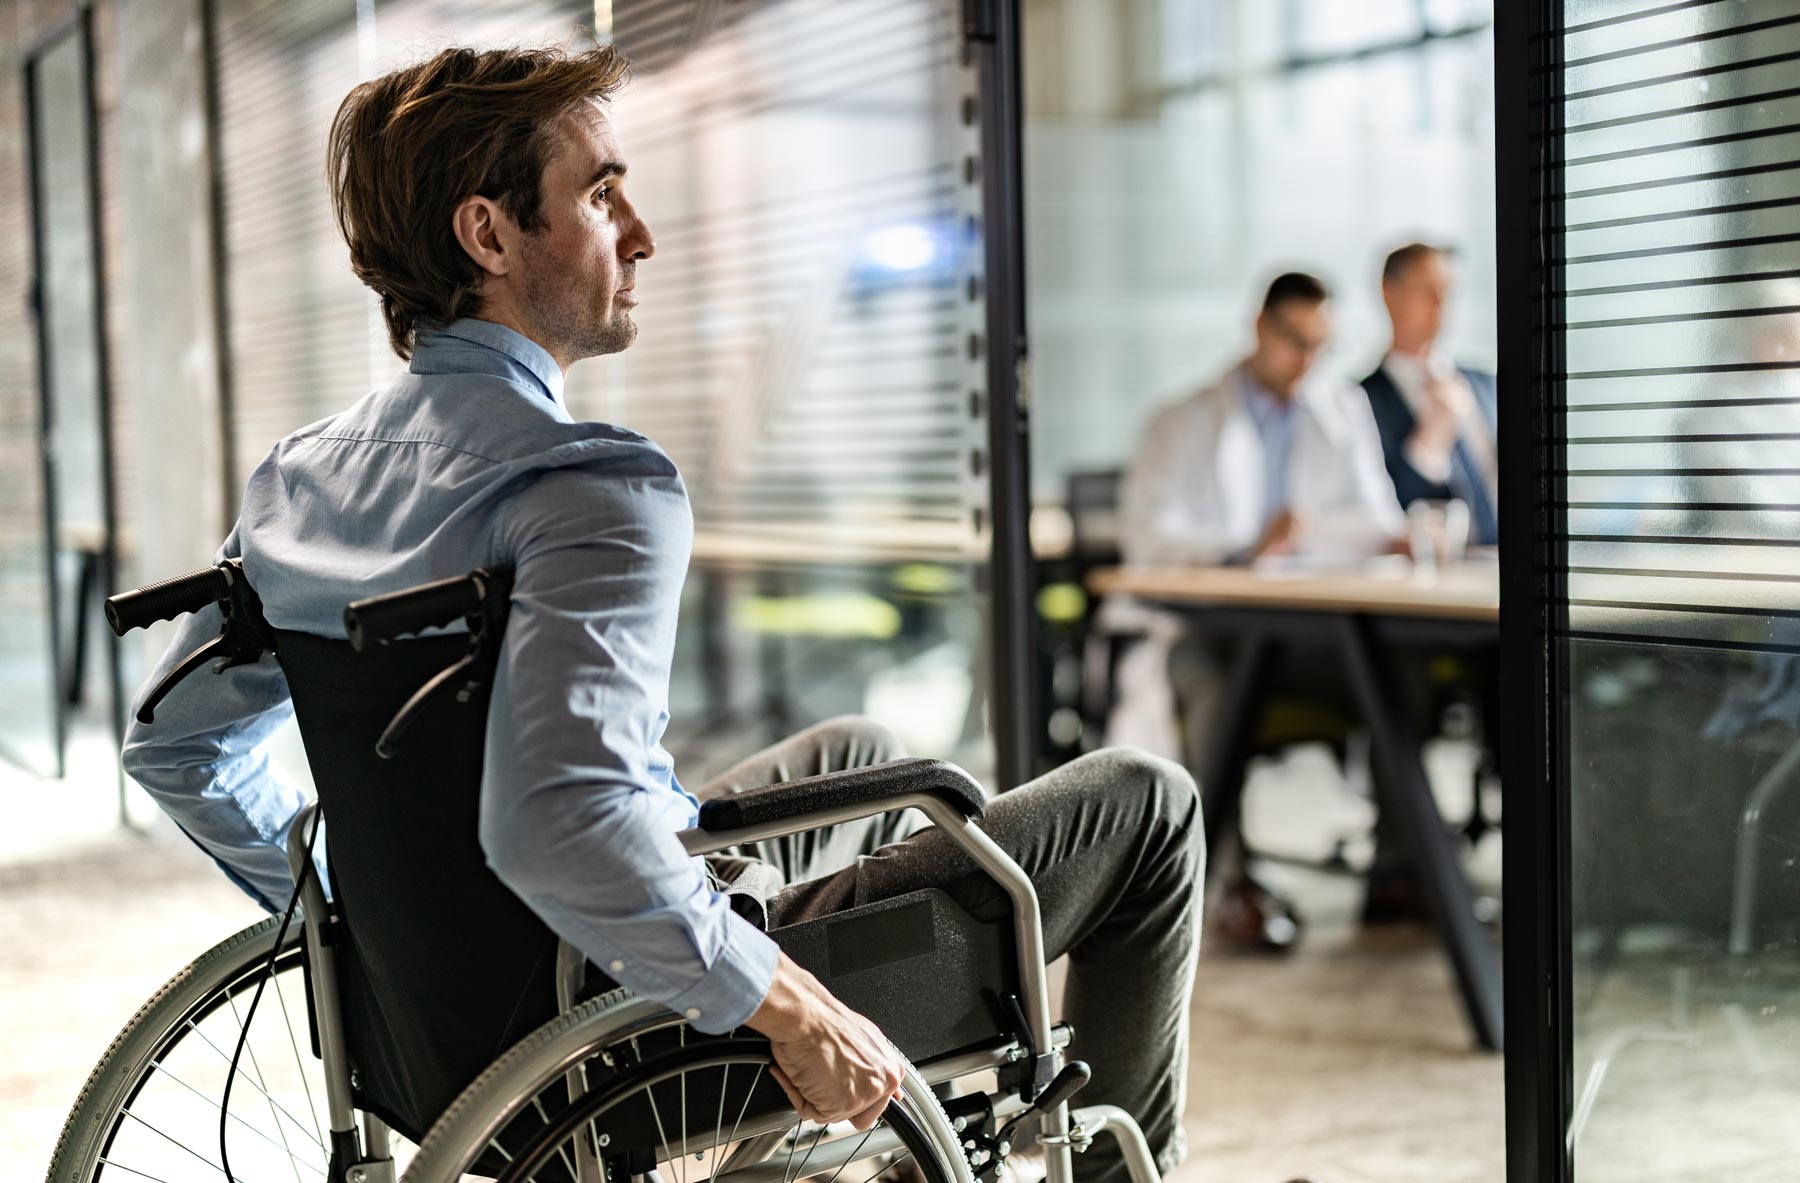 Illustrative image depicting a potential situation involving disability discrimination in a New York City office